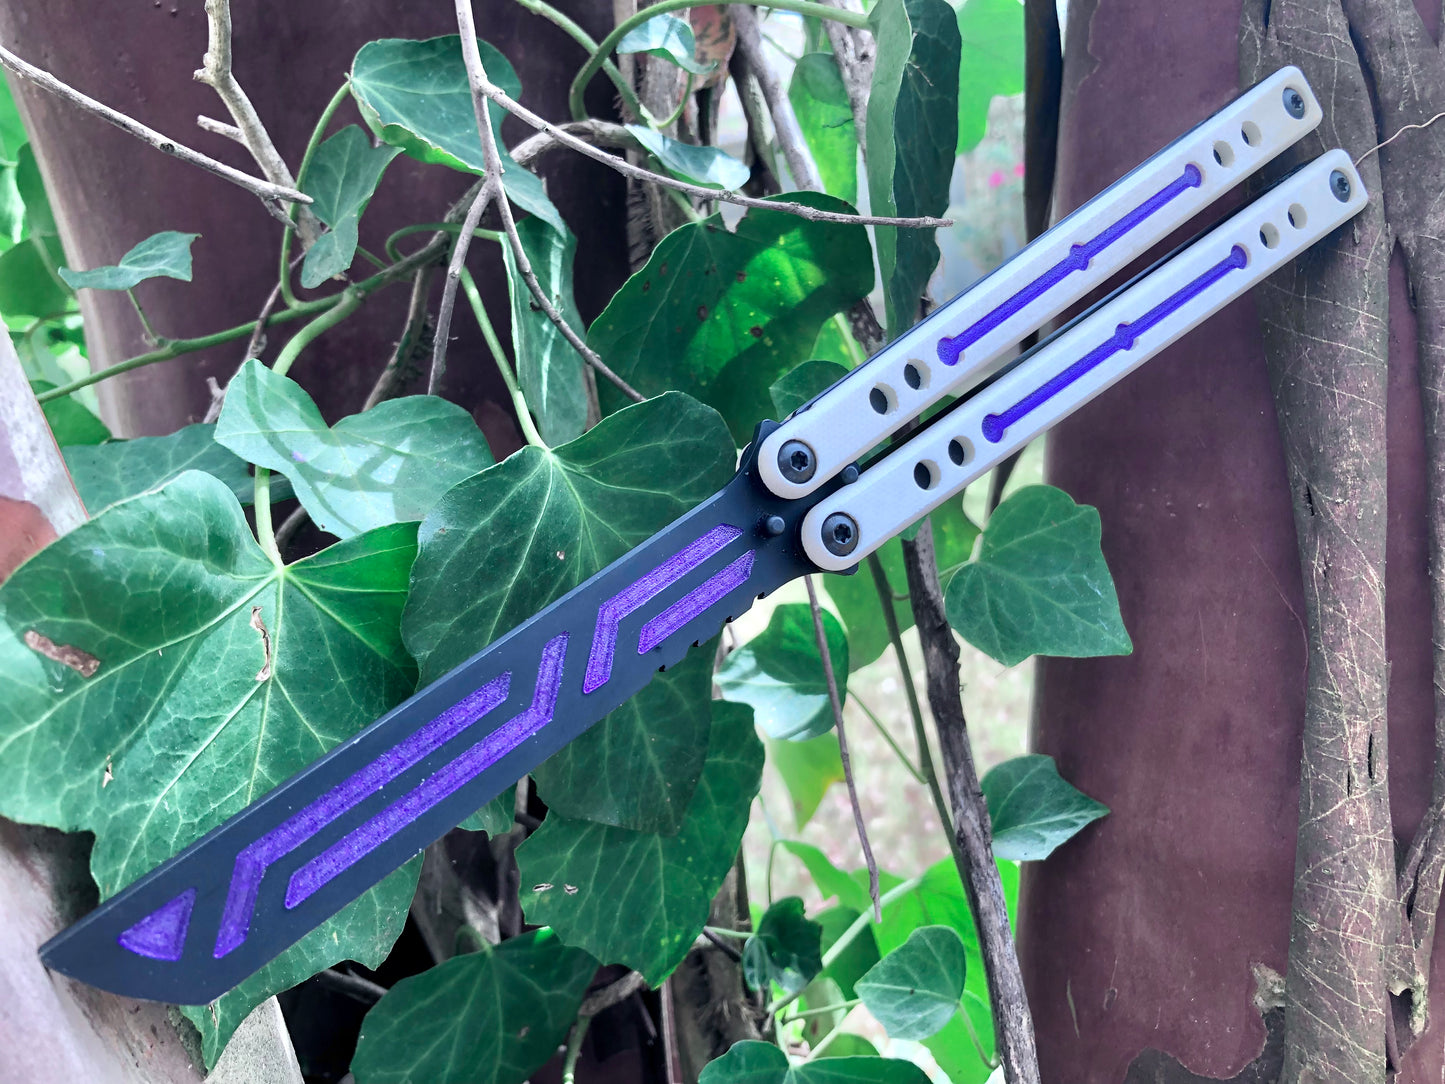 Modify the balance and add a pop of color to your Squid industries Nautilus balisong trainer with these polyurethane blade inserts and handle inlays. The objective of this mod is to add blade weight for a slightly more neutral balance, with optional cosmetic handle inlays to add a pop of color.